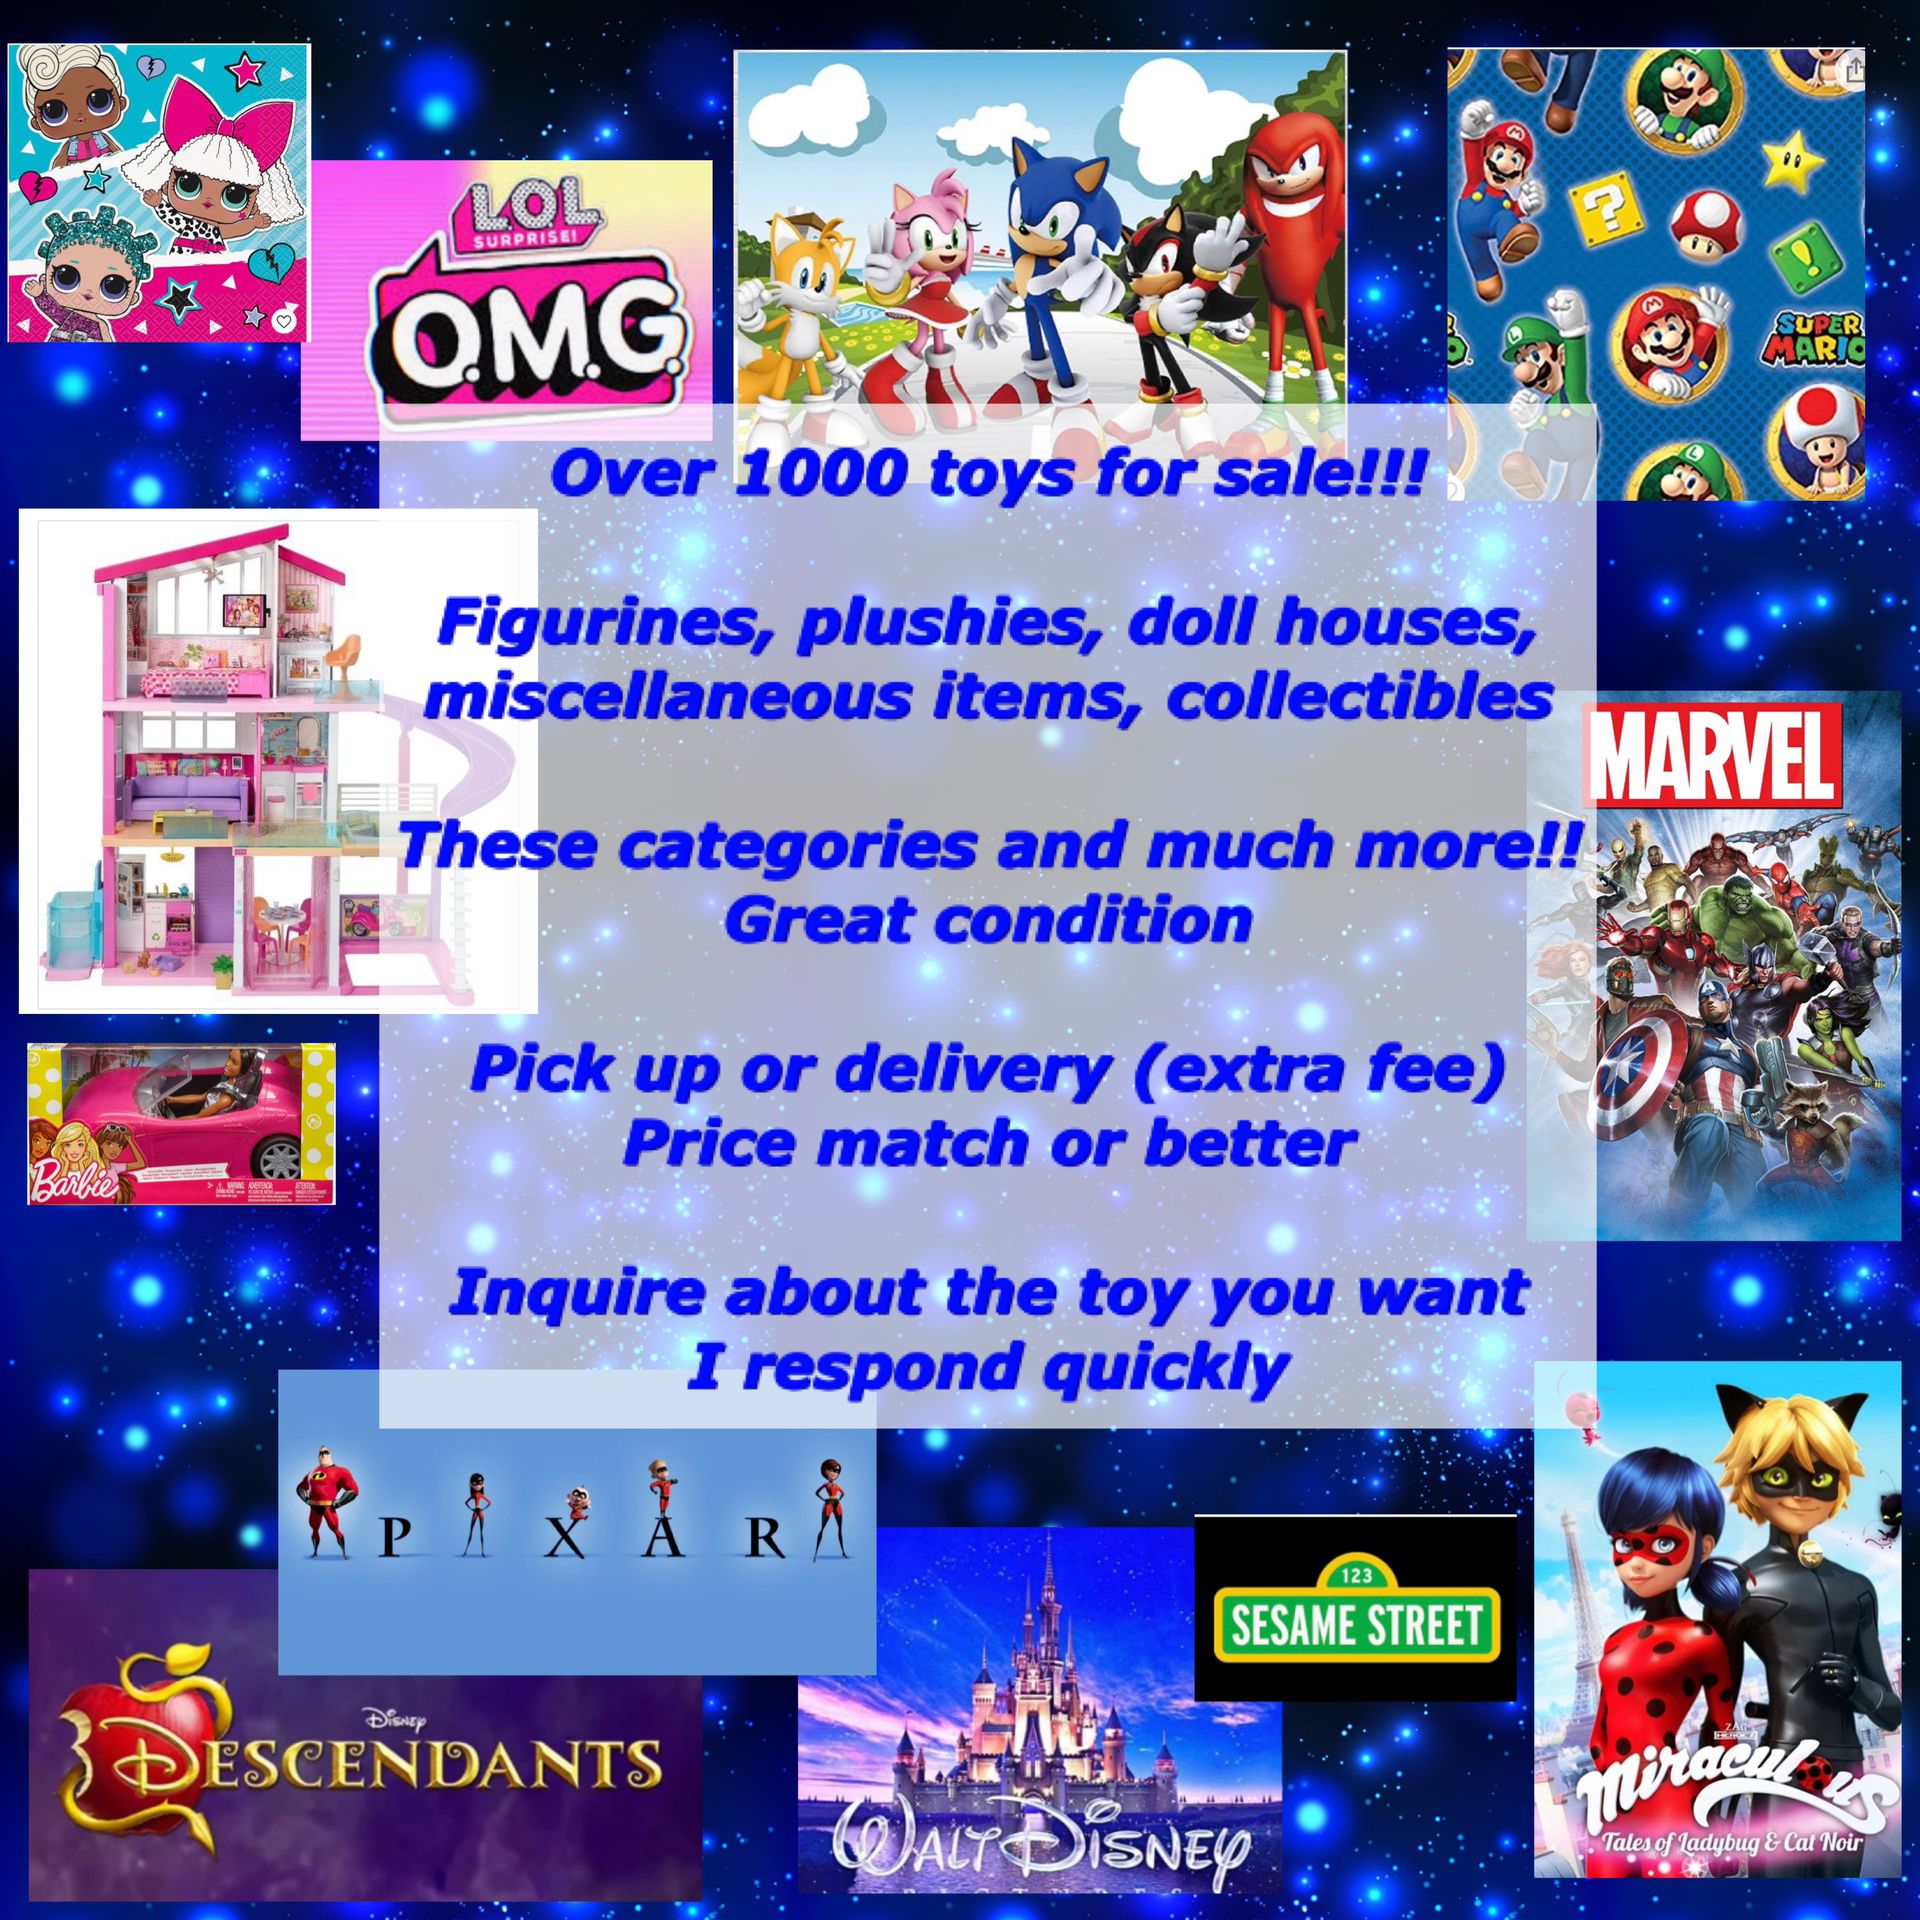 Disney Descendants Toys And More (see full post)